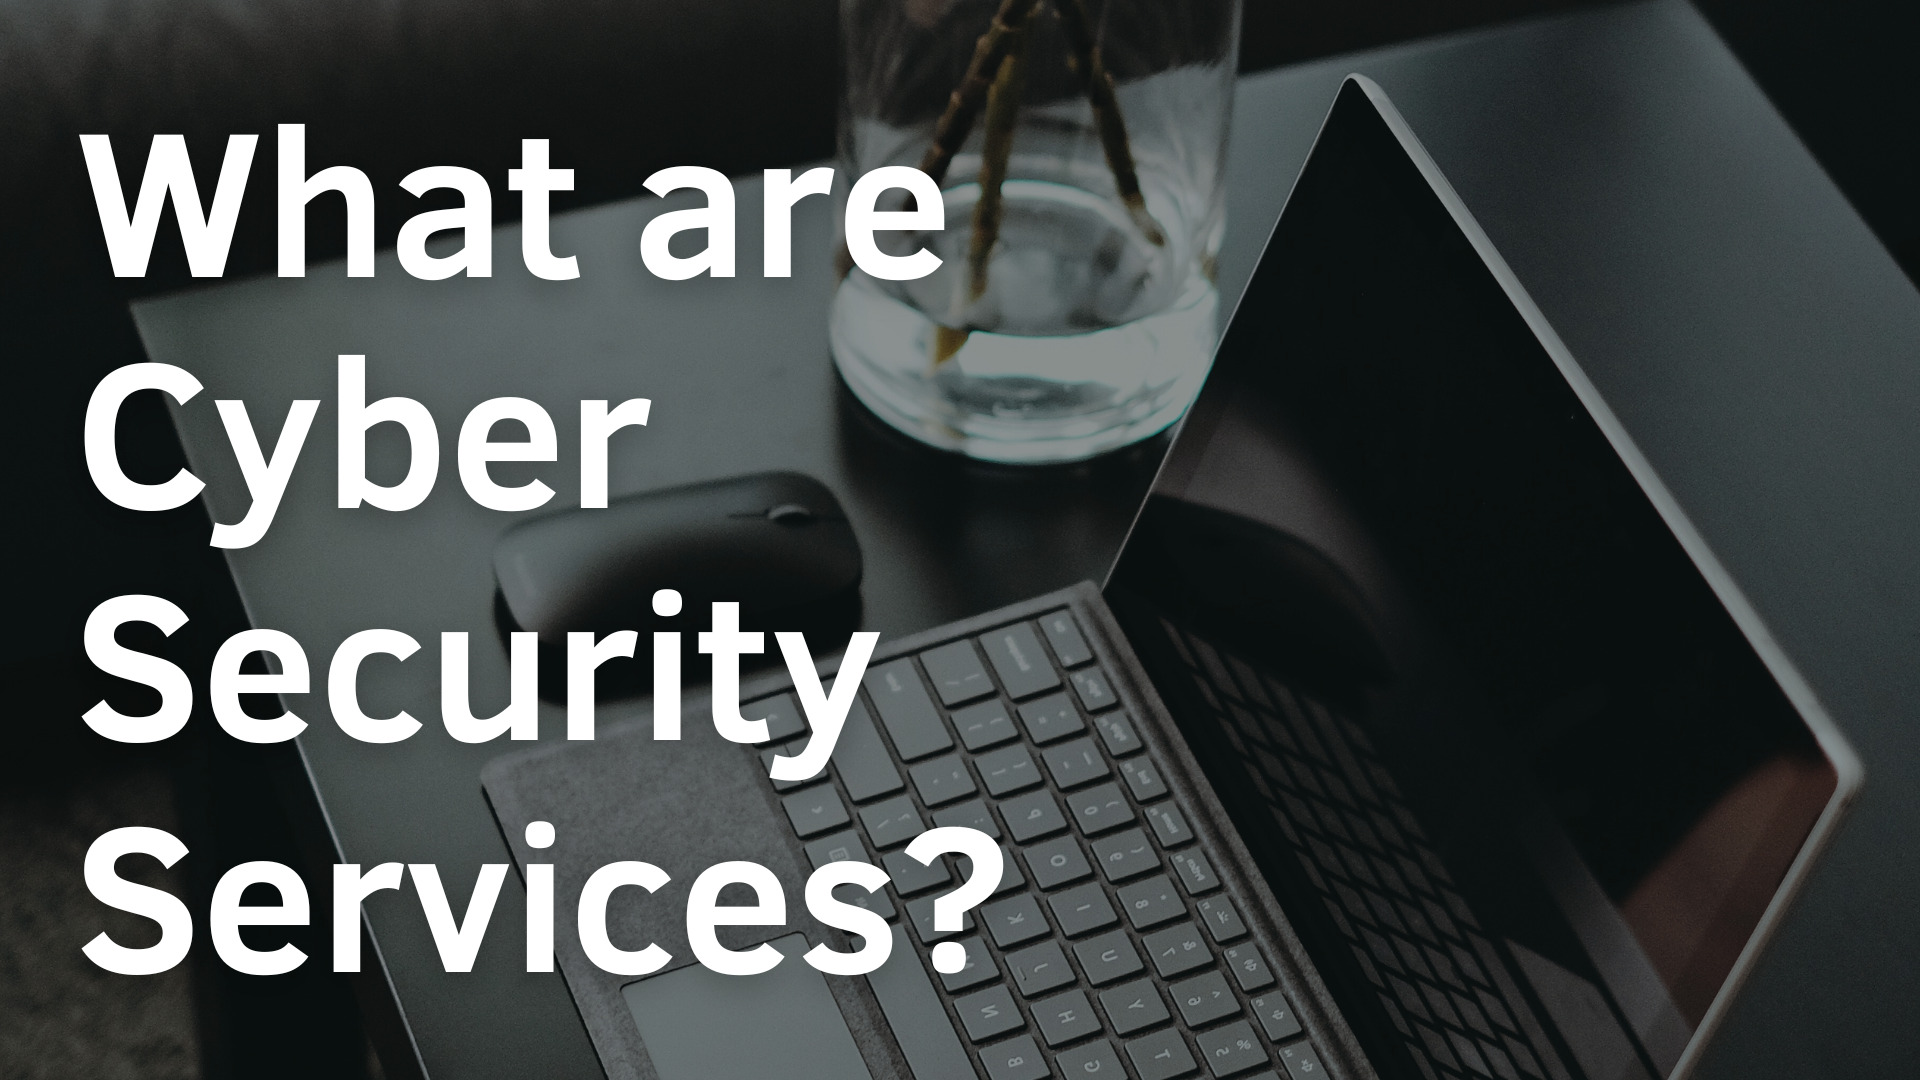 What are Cyber Security Services?